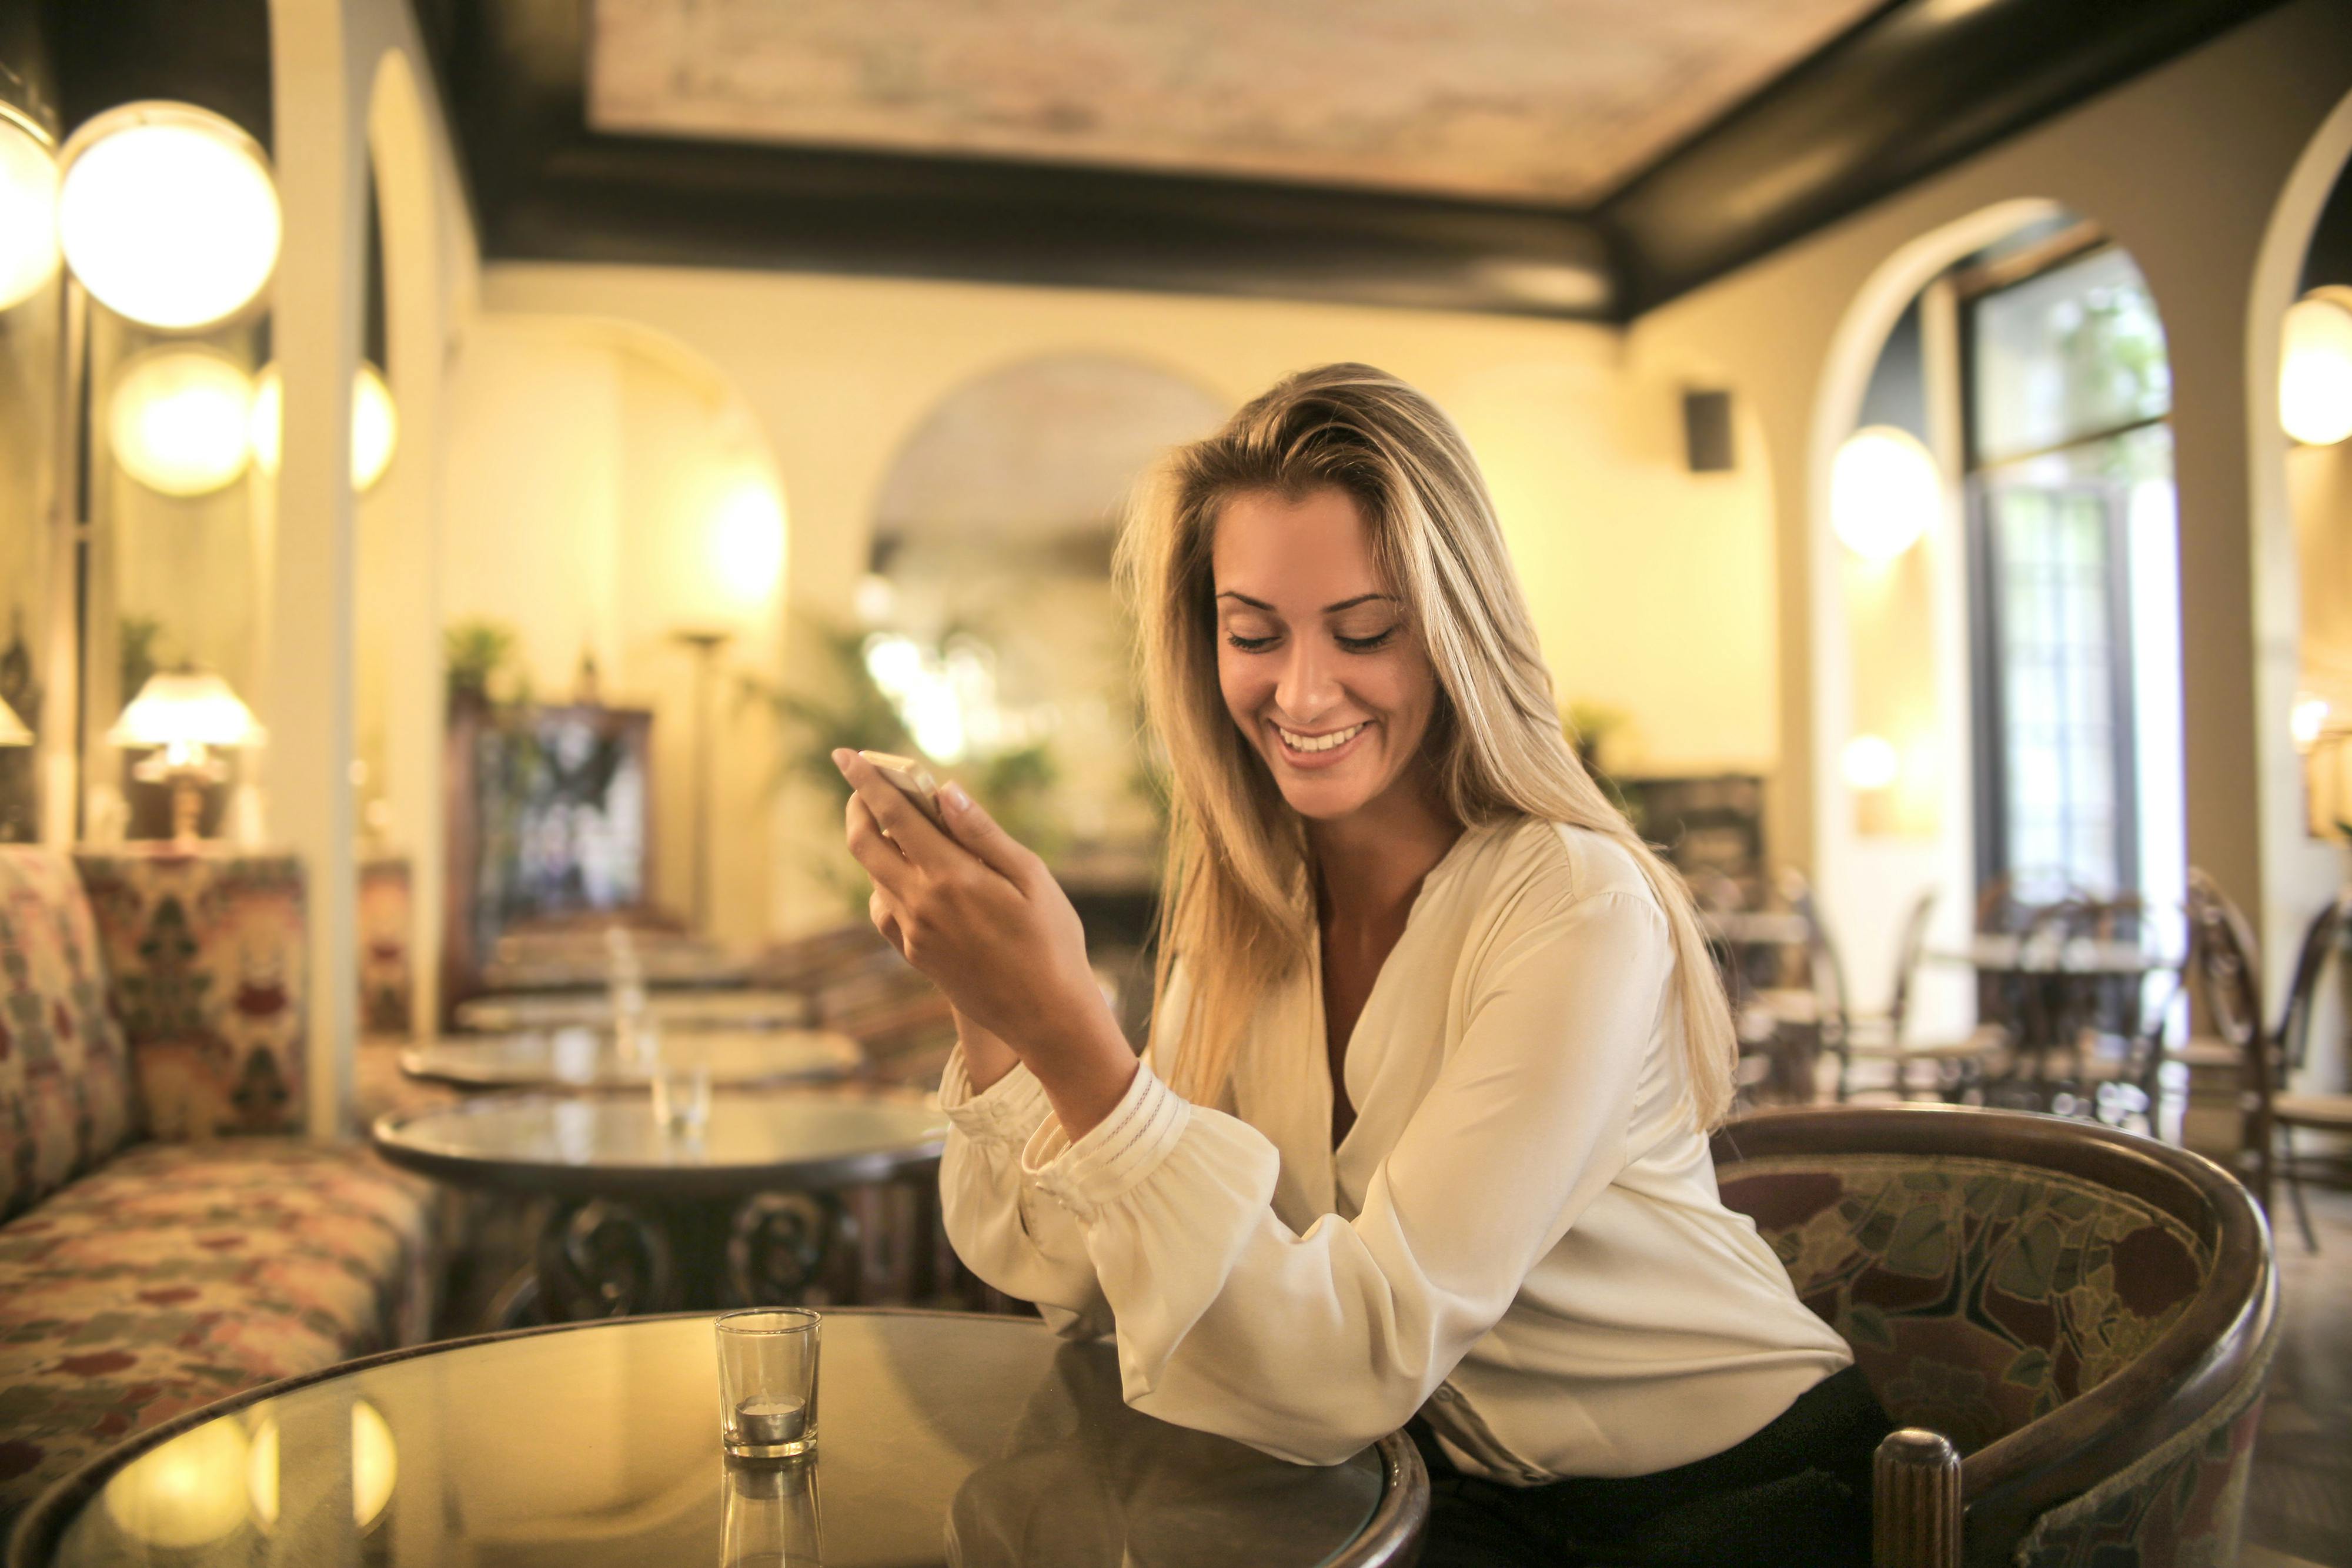 A woman seemingly happy while holding up her phone | Source: Pexels